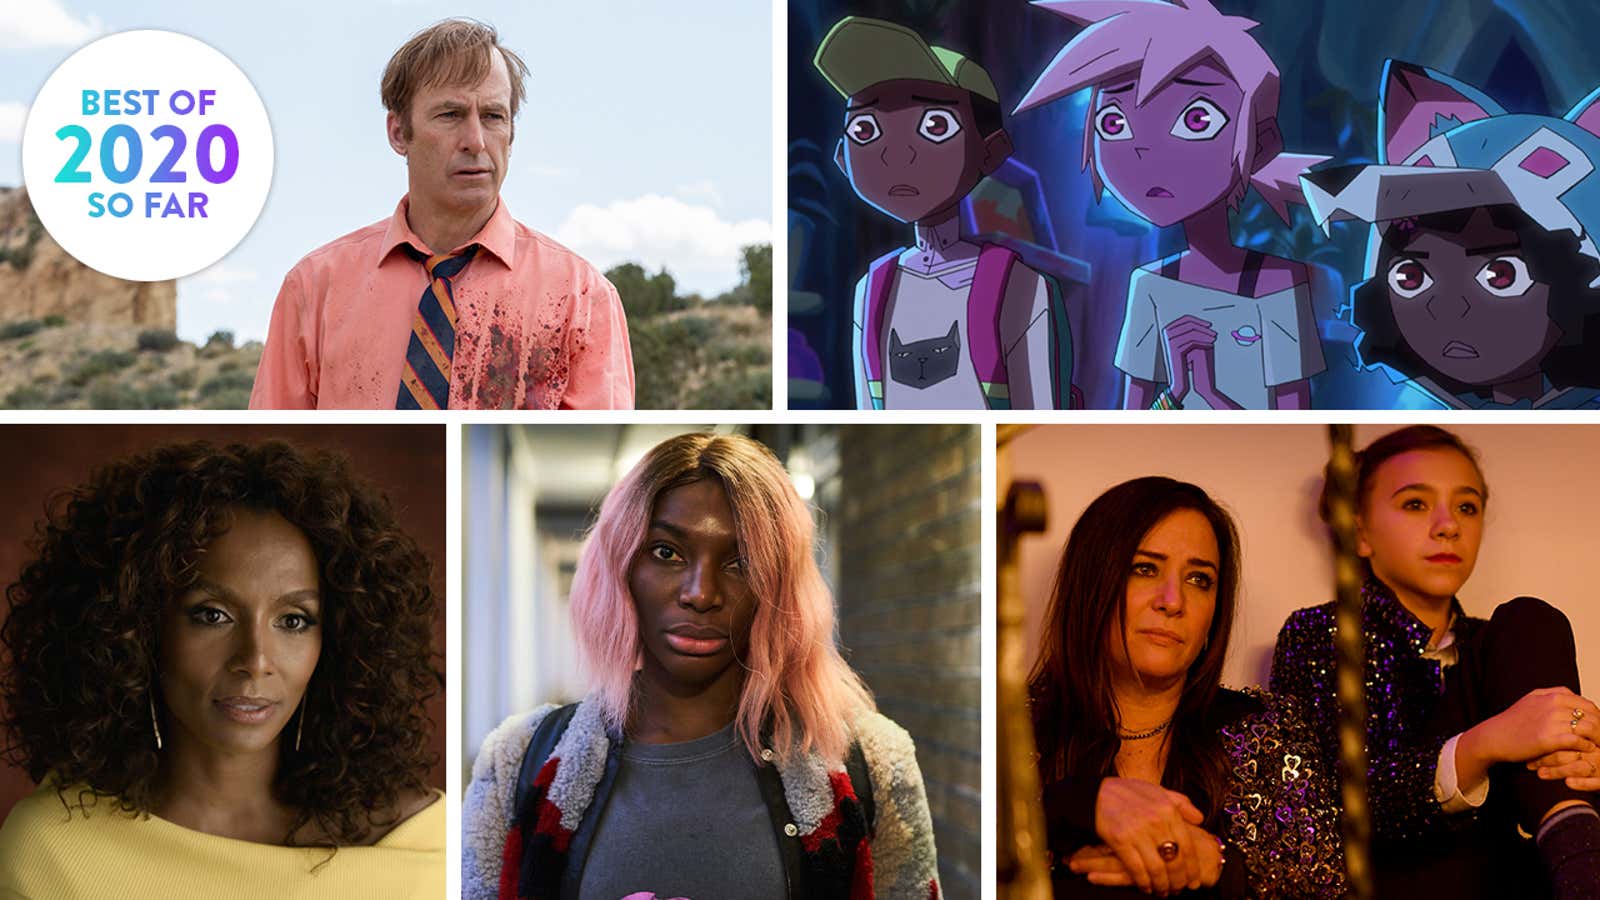 Clockwise from top left: Better Call Saul (Photo: Greg Lewis, AMC/Sony Pictures Television), Kipo And The Age Of Wonderbeasts (Screenshot), Better Things (Photo: Suzanne Tenner/FX), I May Destroy You (Photo: Natalie Seery/HBO), Visible: Out On Television (Photo: Apple TV+)